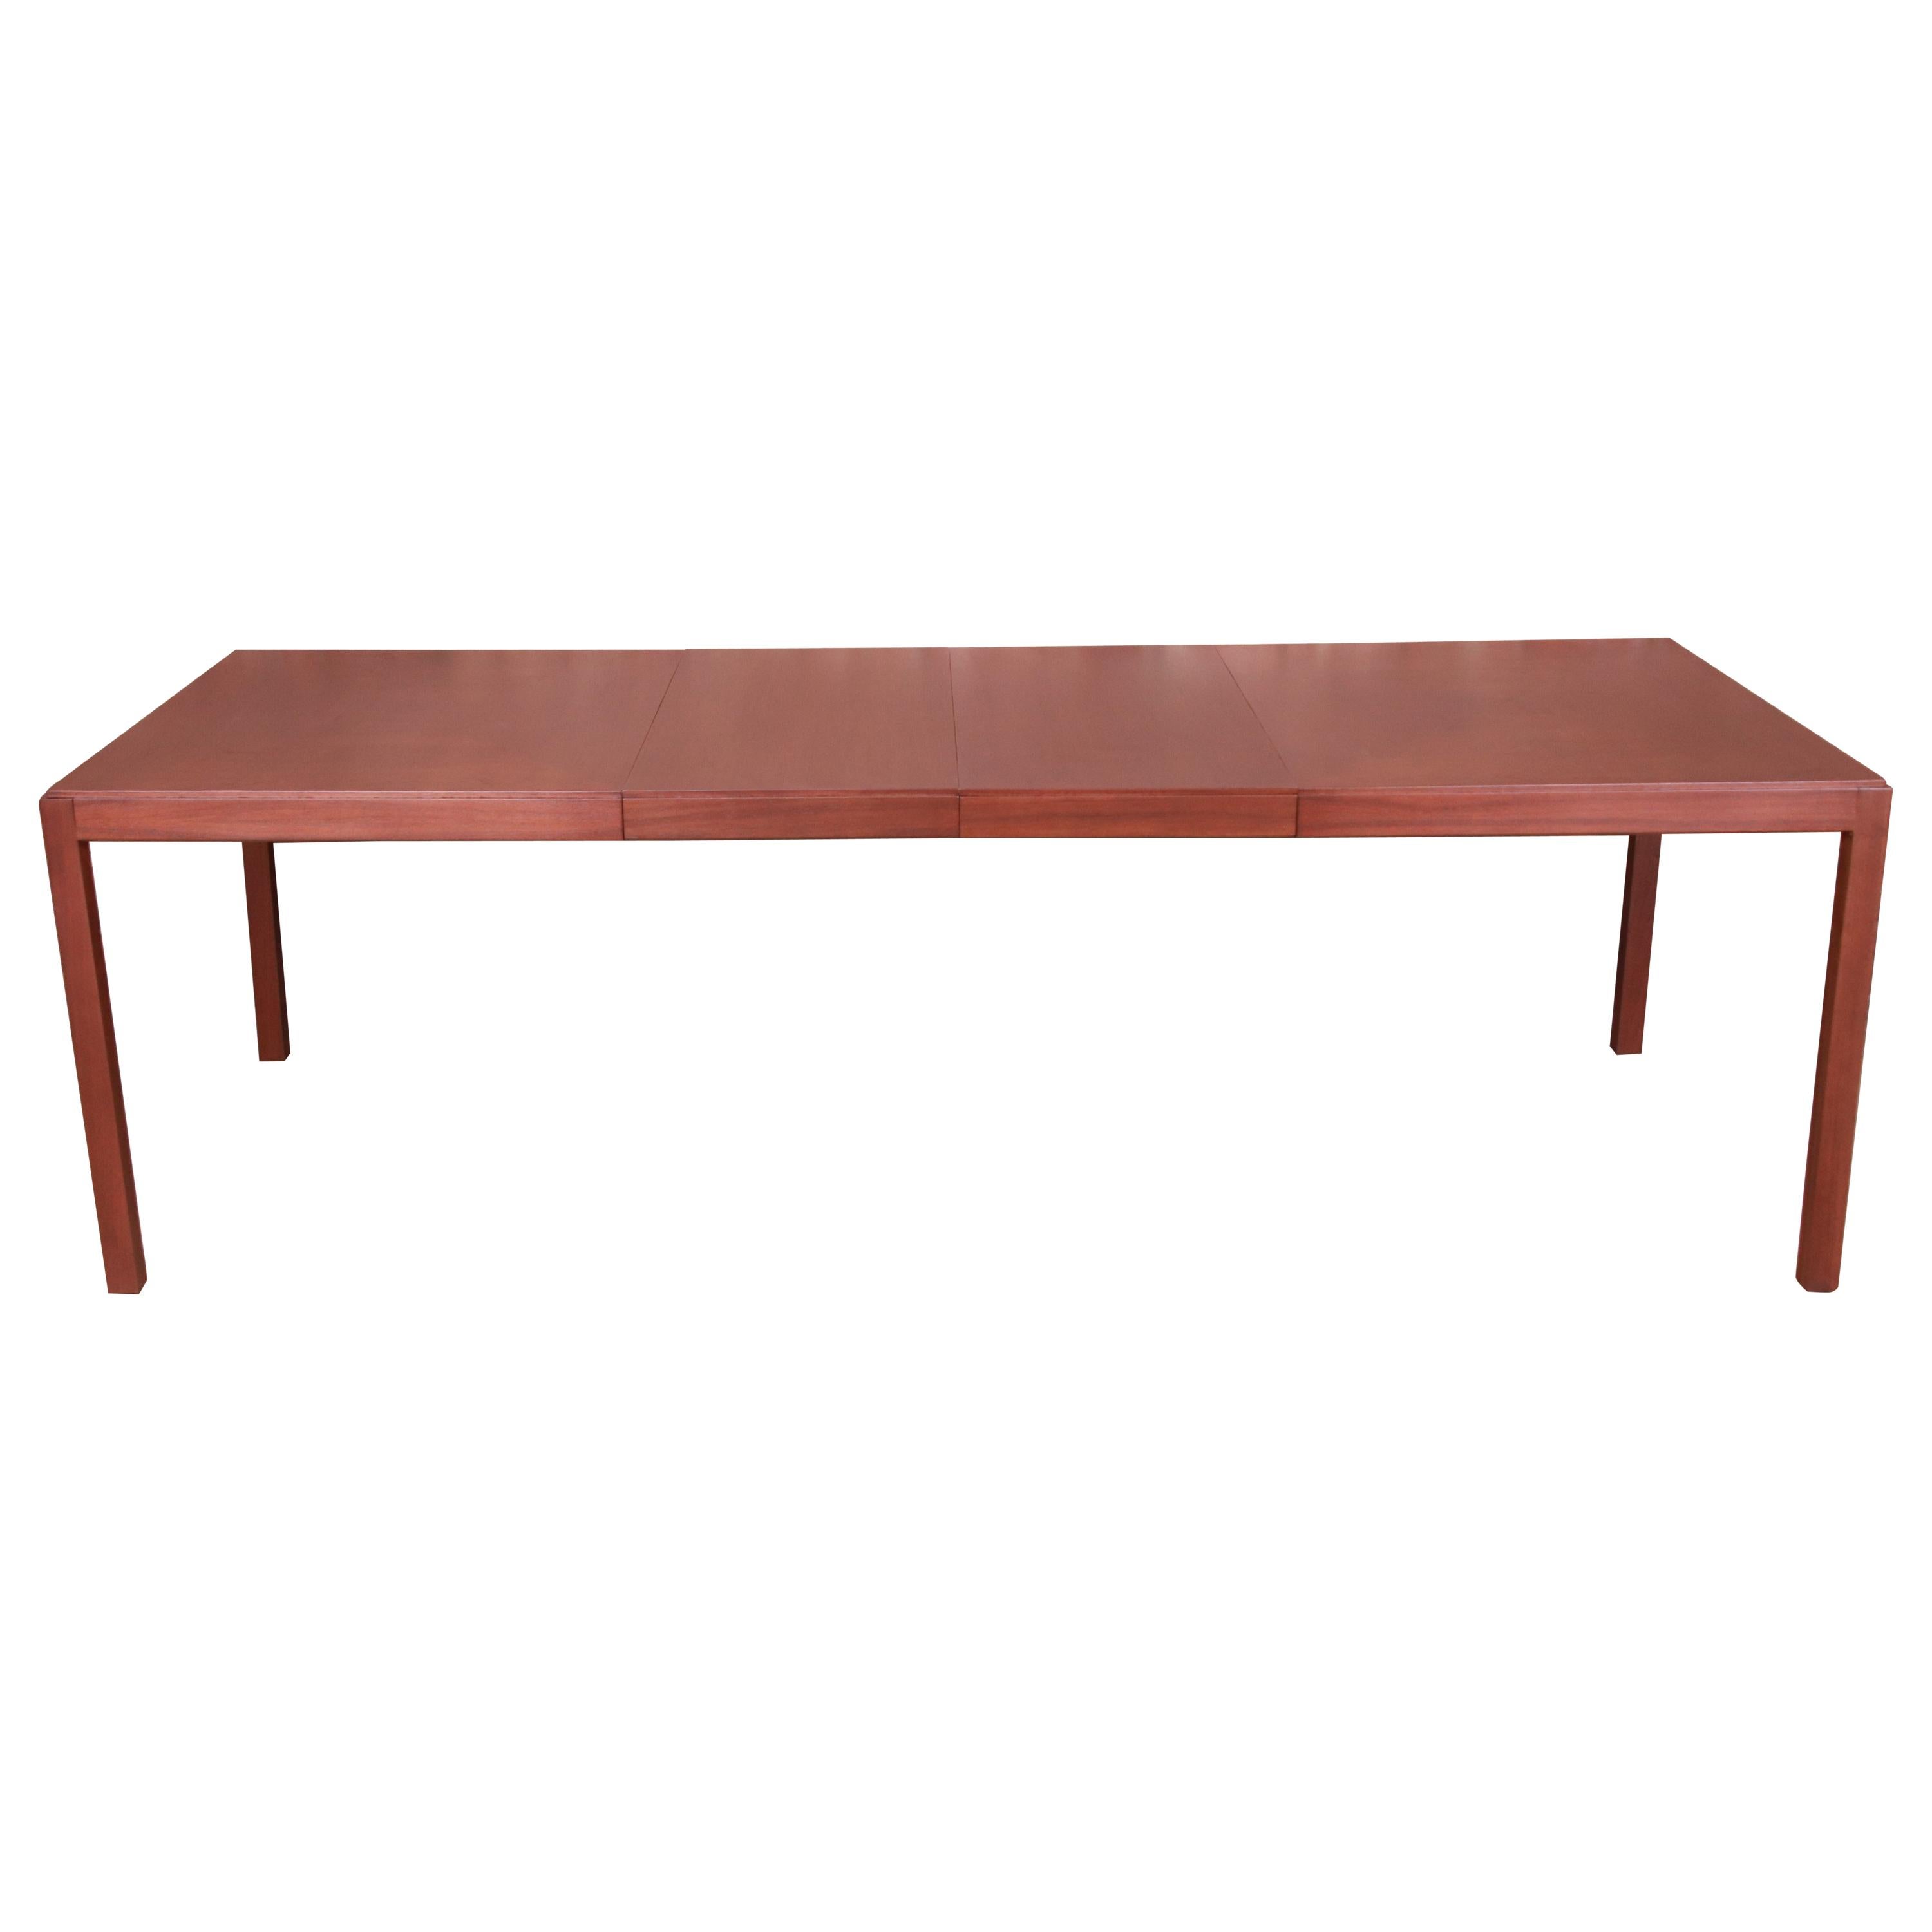 John Stuart Mid-Century Modern Walnut Extension Dining Table, Newly Refinished For Sale